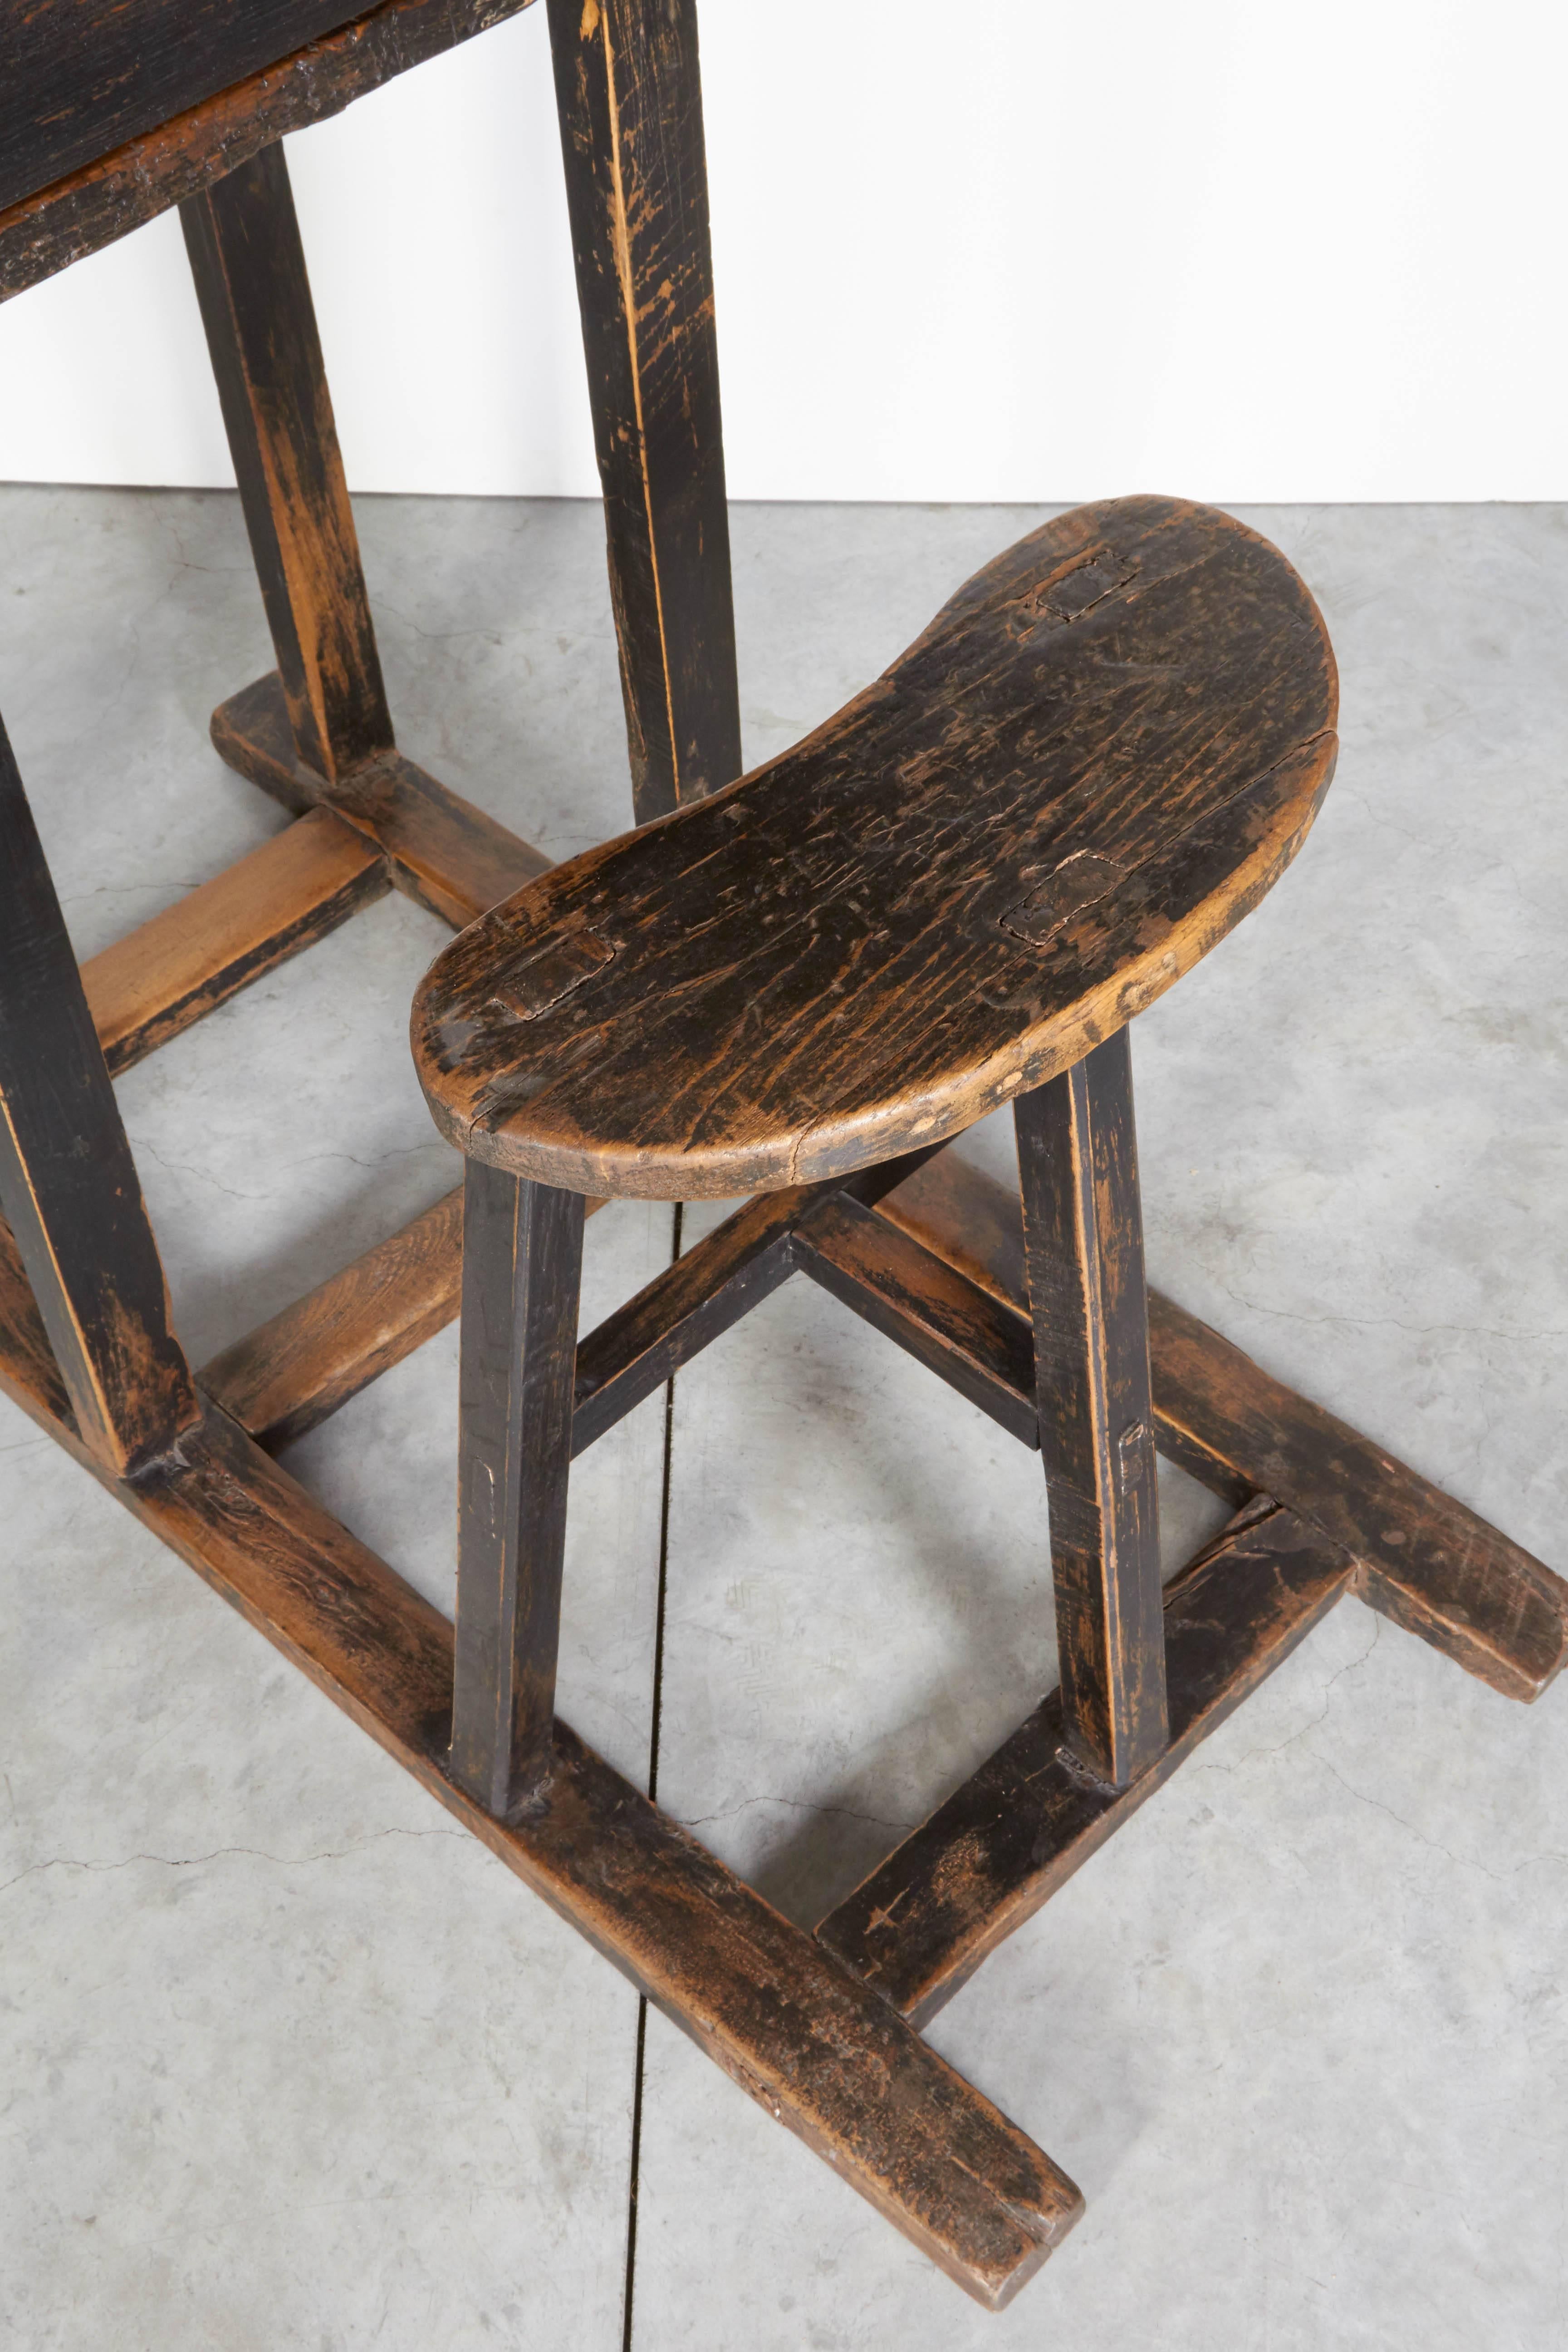 A nicely worn antique Chinese school desk with simple stool and single drawer desk all in one piece. Great patina with traces of original black paint. From Shanxi Province, circa 1900.
a b h a y a 
D305.